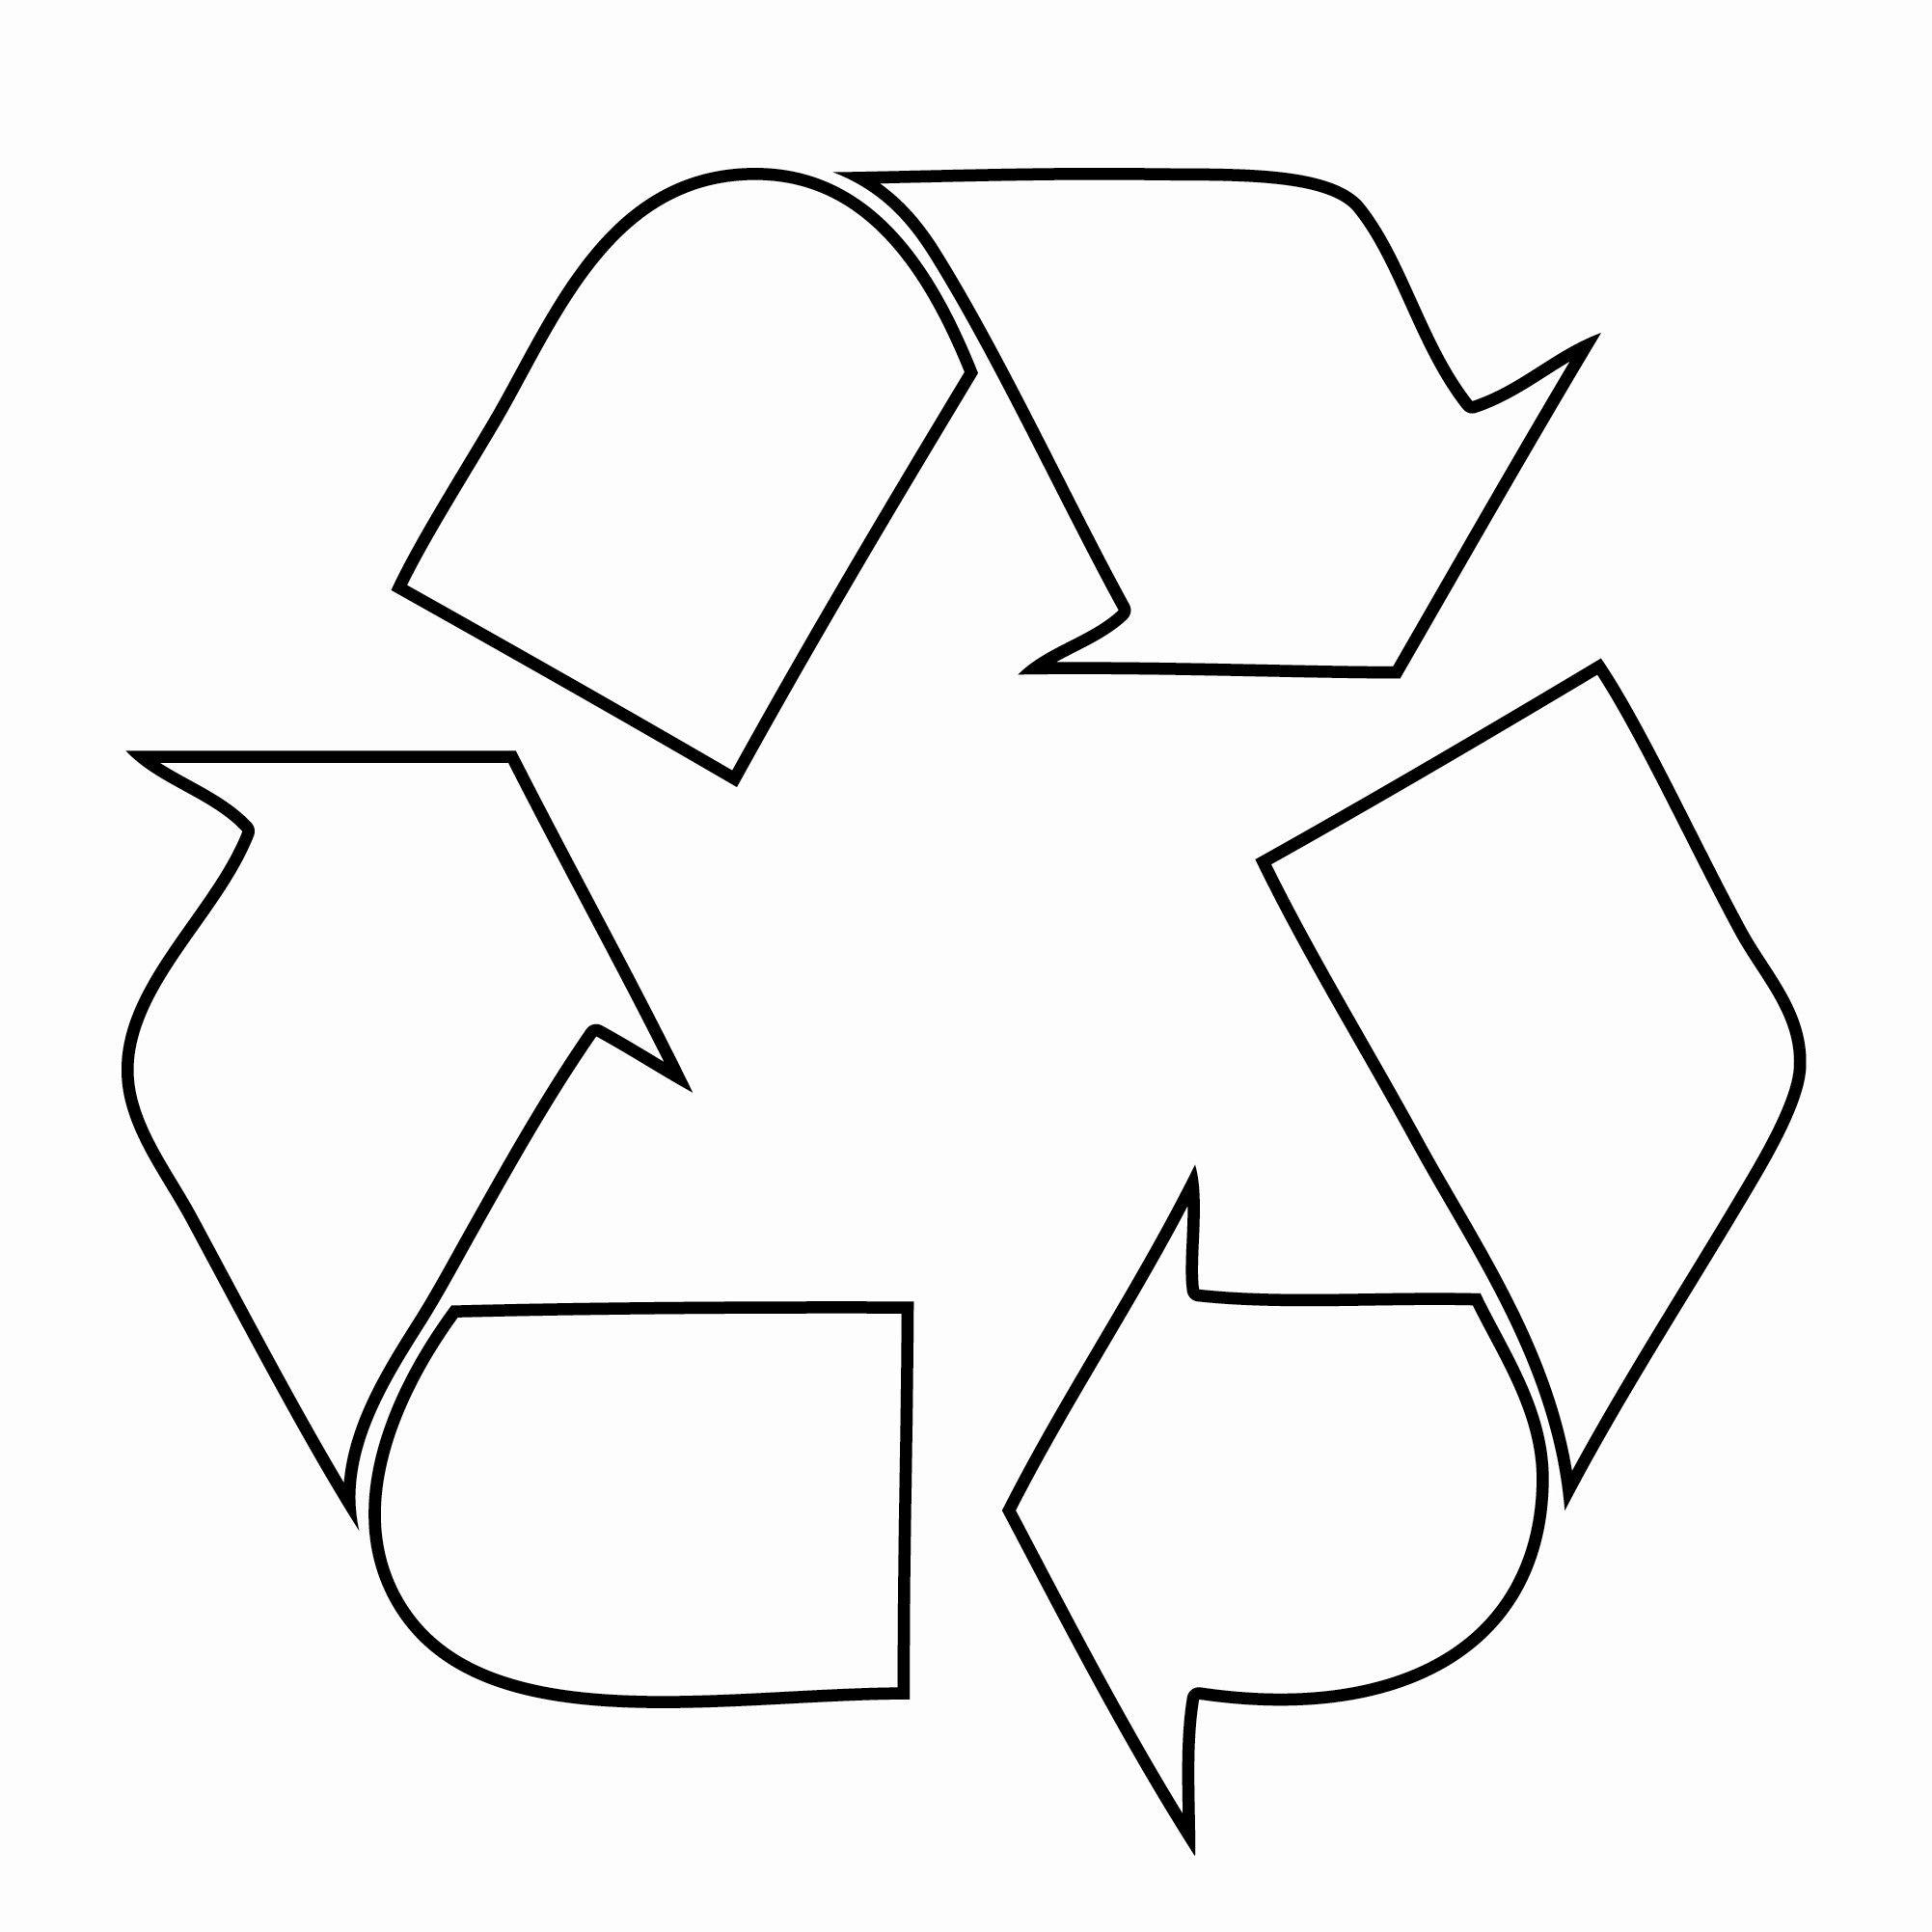 White Recycle Logo - Free Recycle Symbol, Download Free Clip Art, Free Clip Art on ...